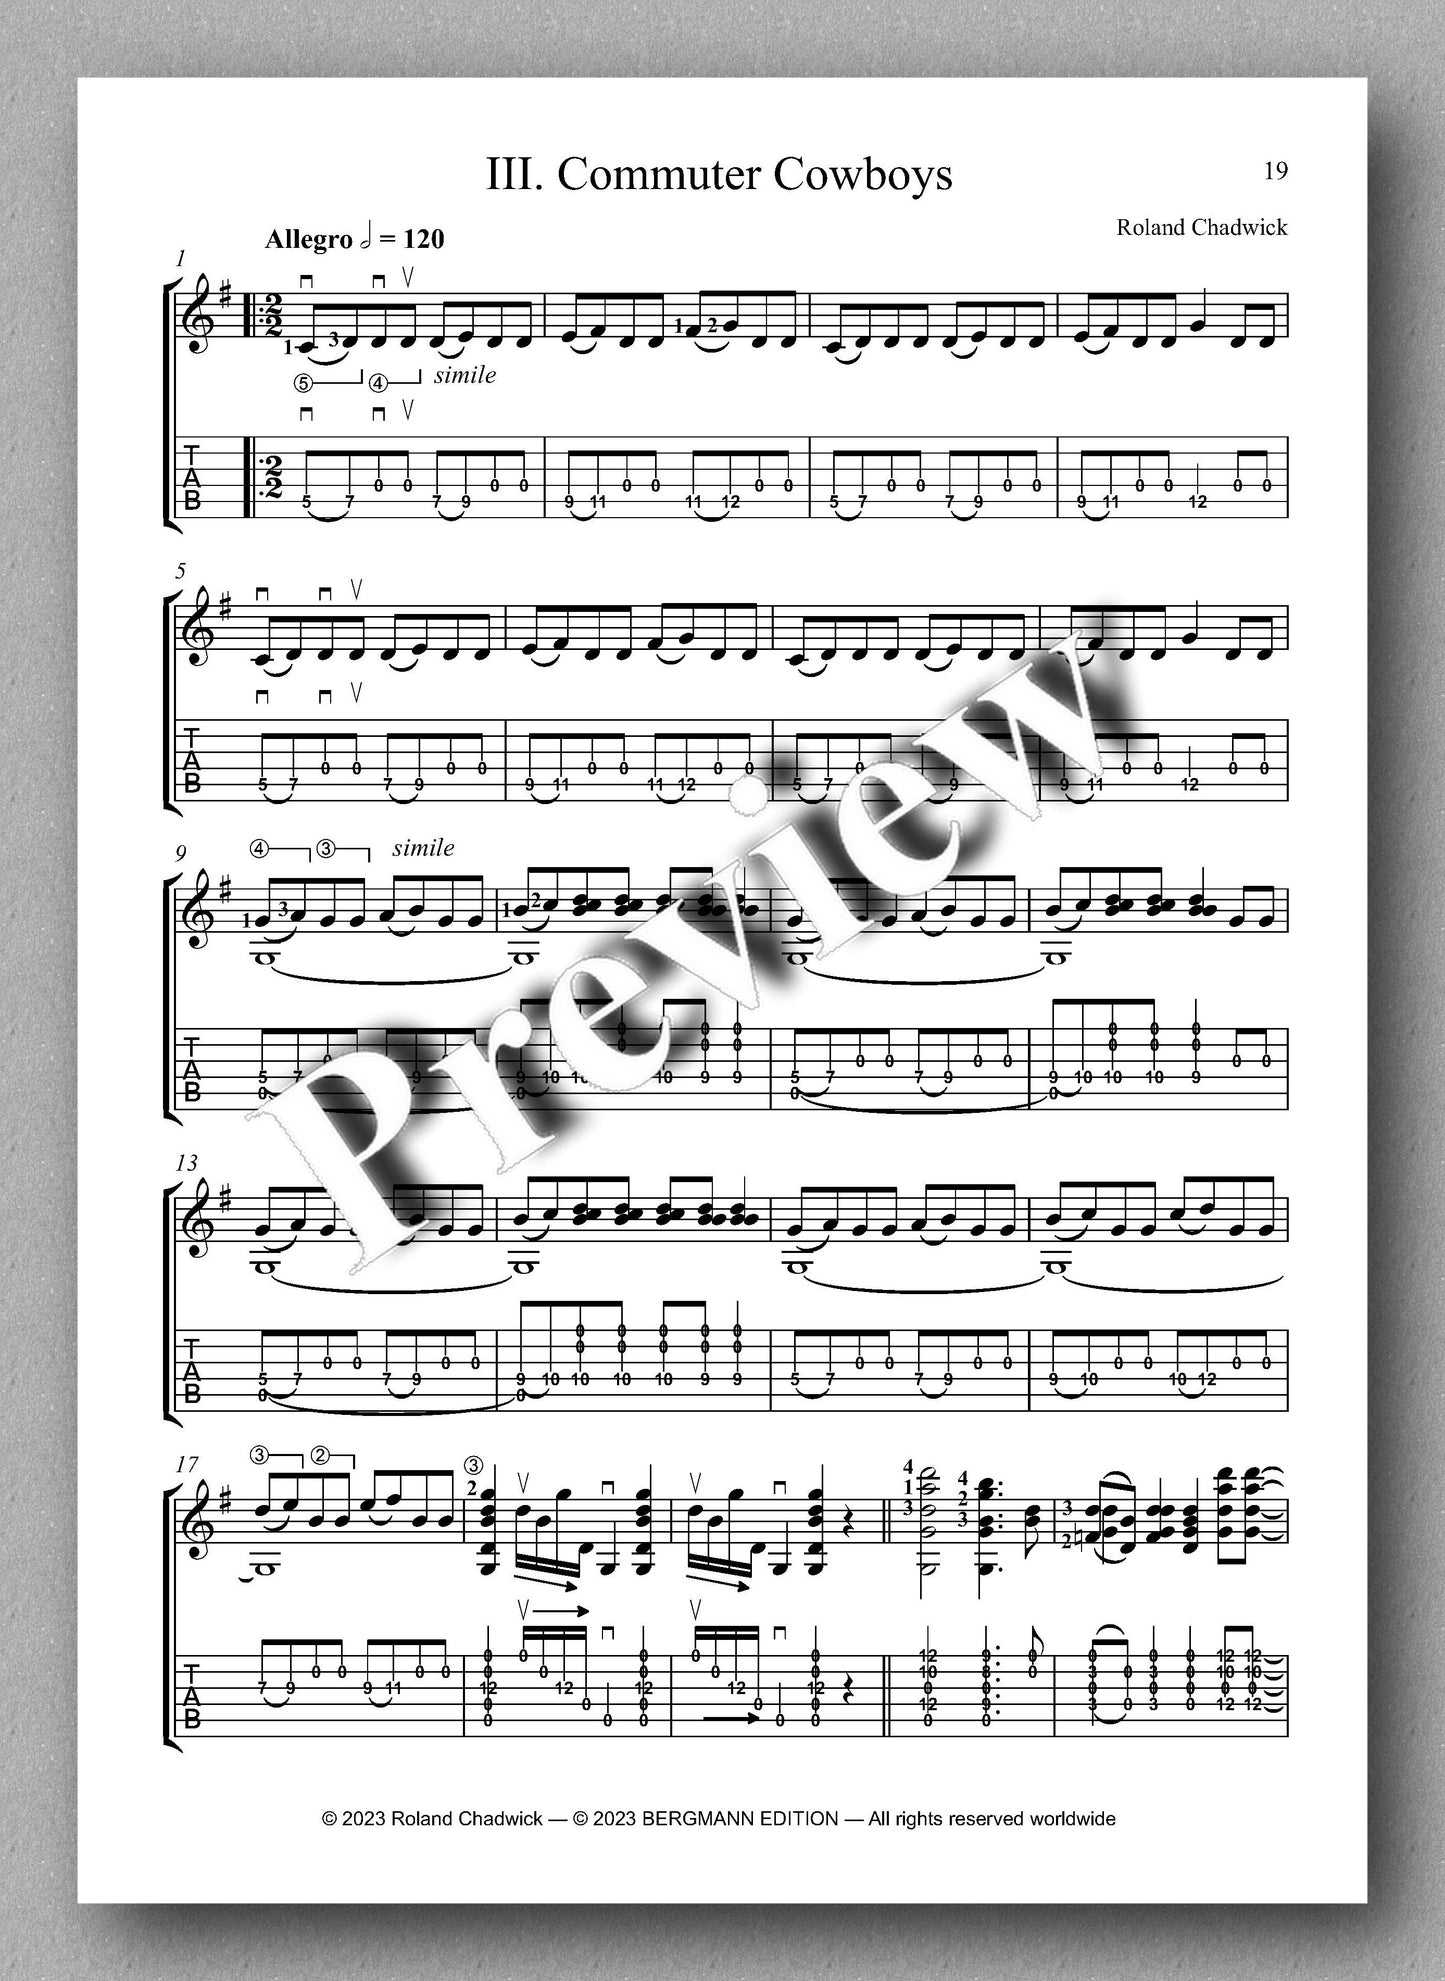 Roland Chadwick, Carabella Suite - preview of the music score 3